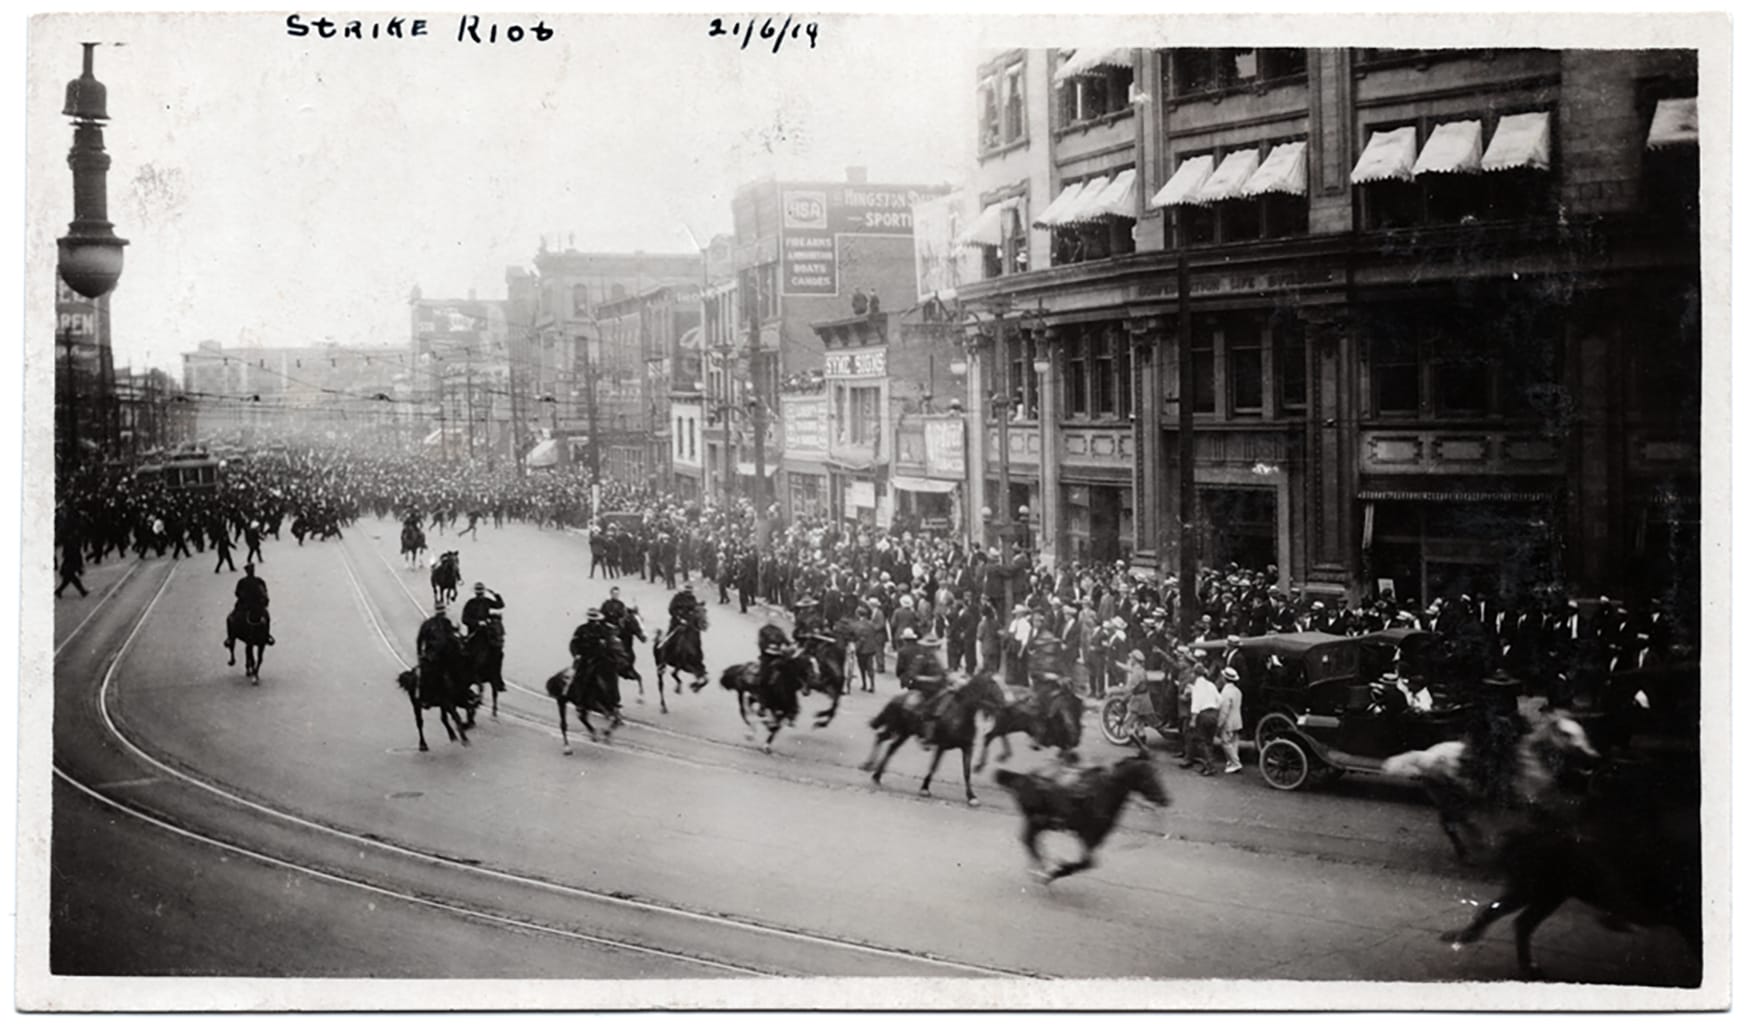 Black and white archival photo of police on horseback charging during 1919 strike